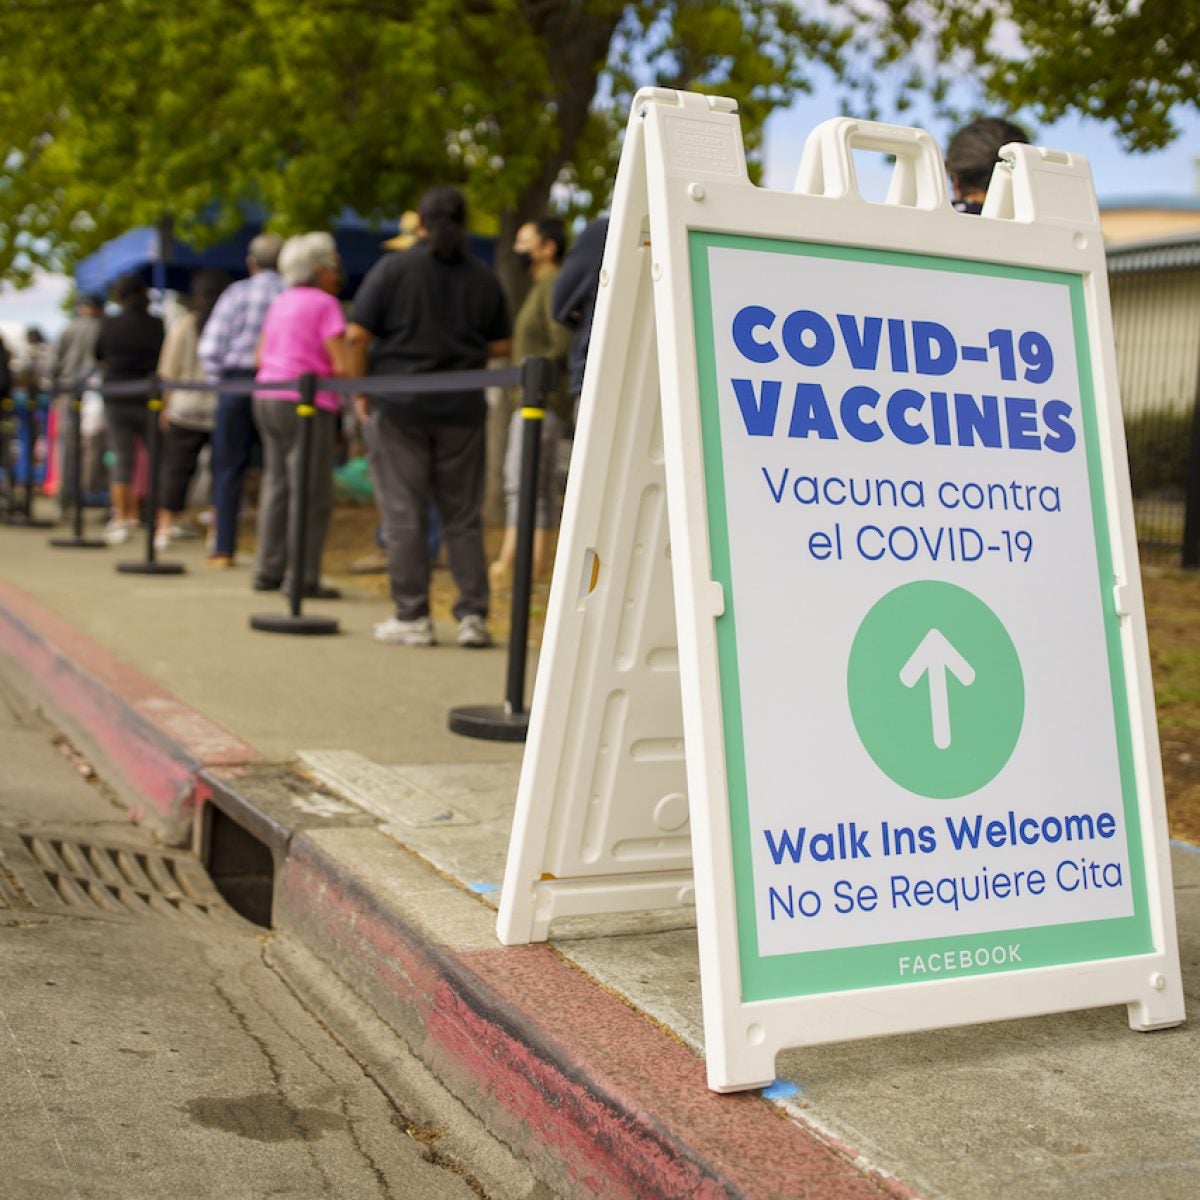 Facebook Launches Initiative to Drive COVID-19 Vaccine Equity